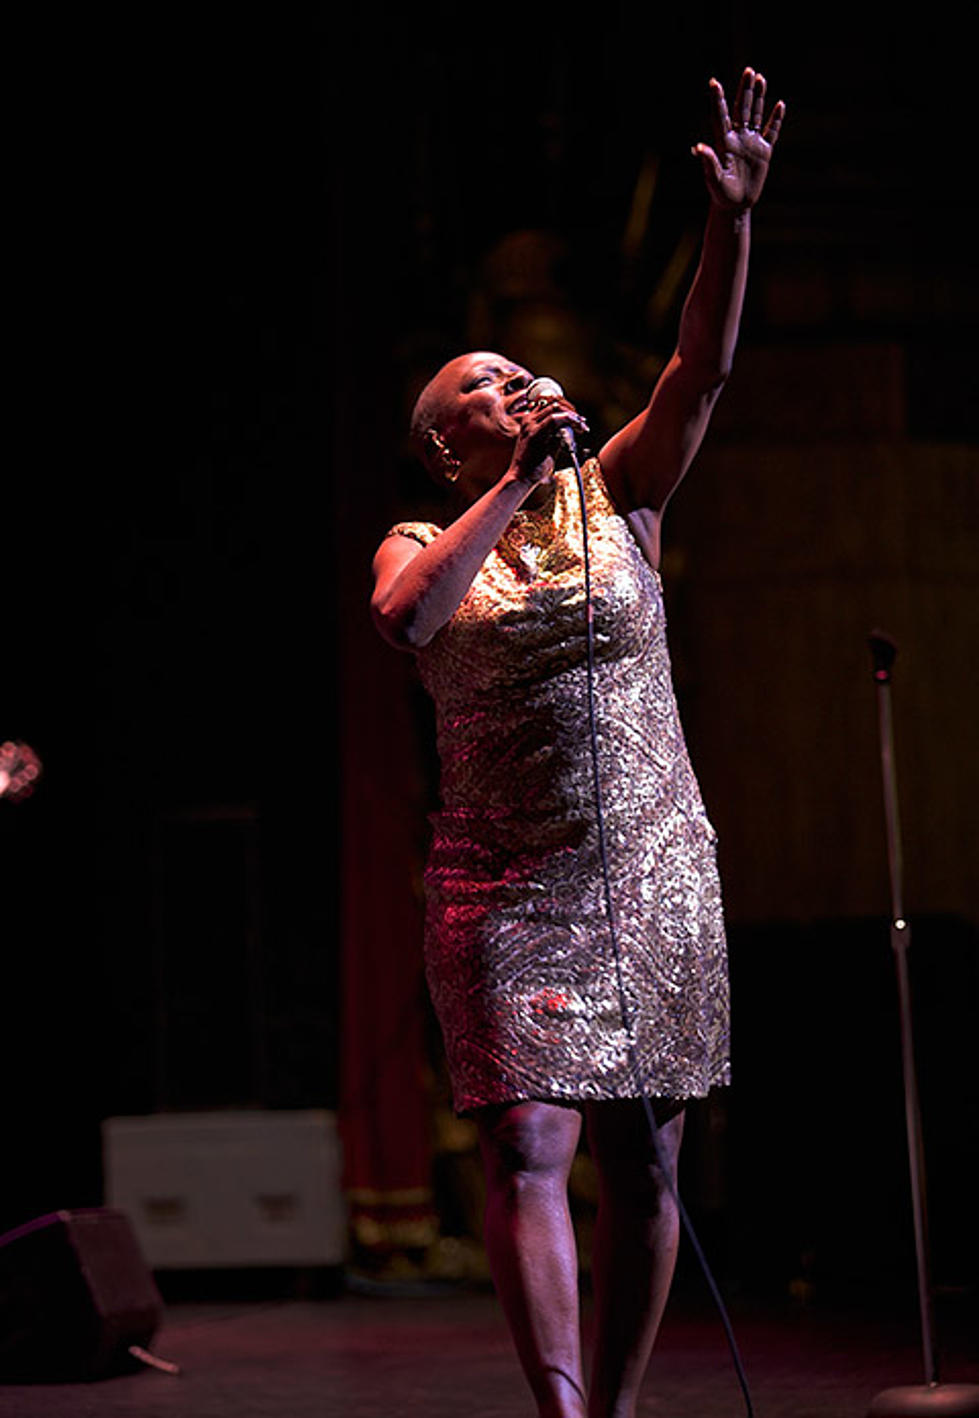 Sharon Jones &#038; The Dap-Kings played Beacon Theatre w/ Valerie June (pics), doing a Q&#038;A on Twitter ++ tour dates